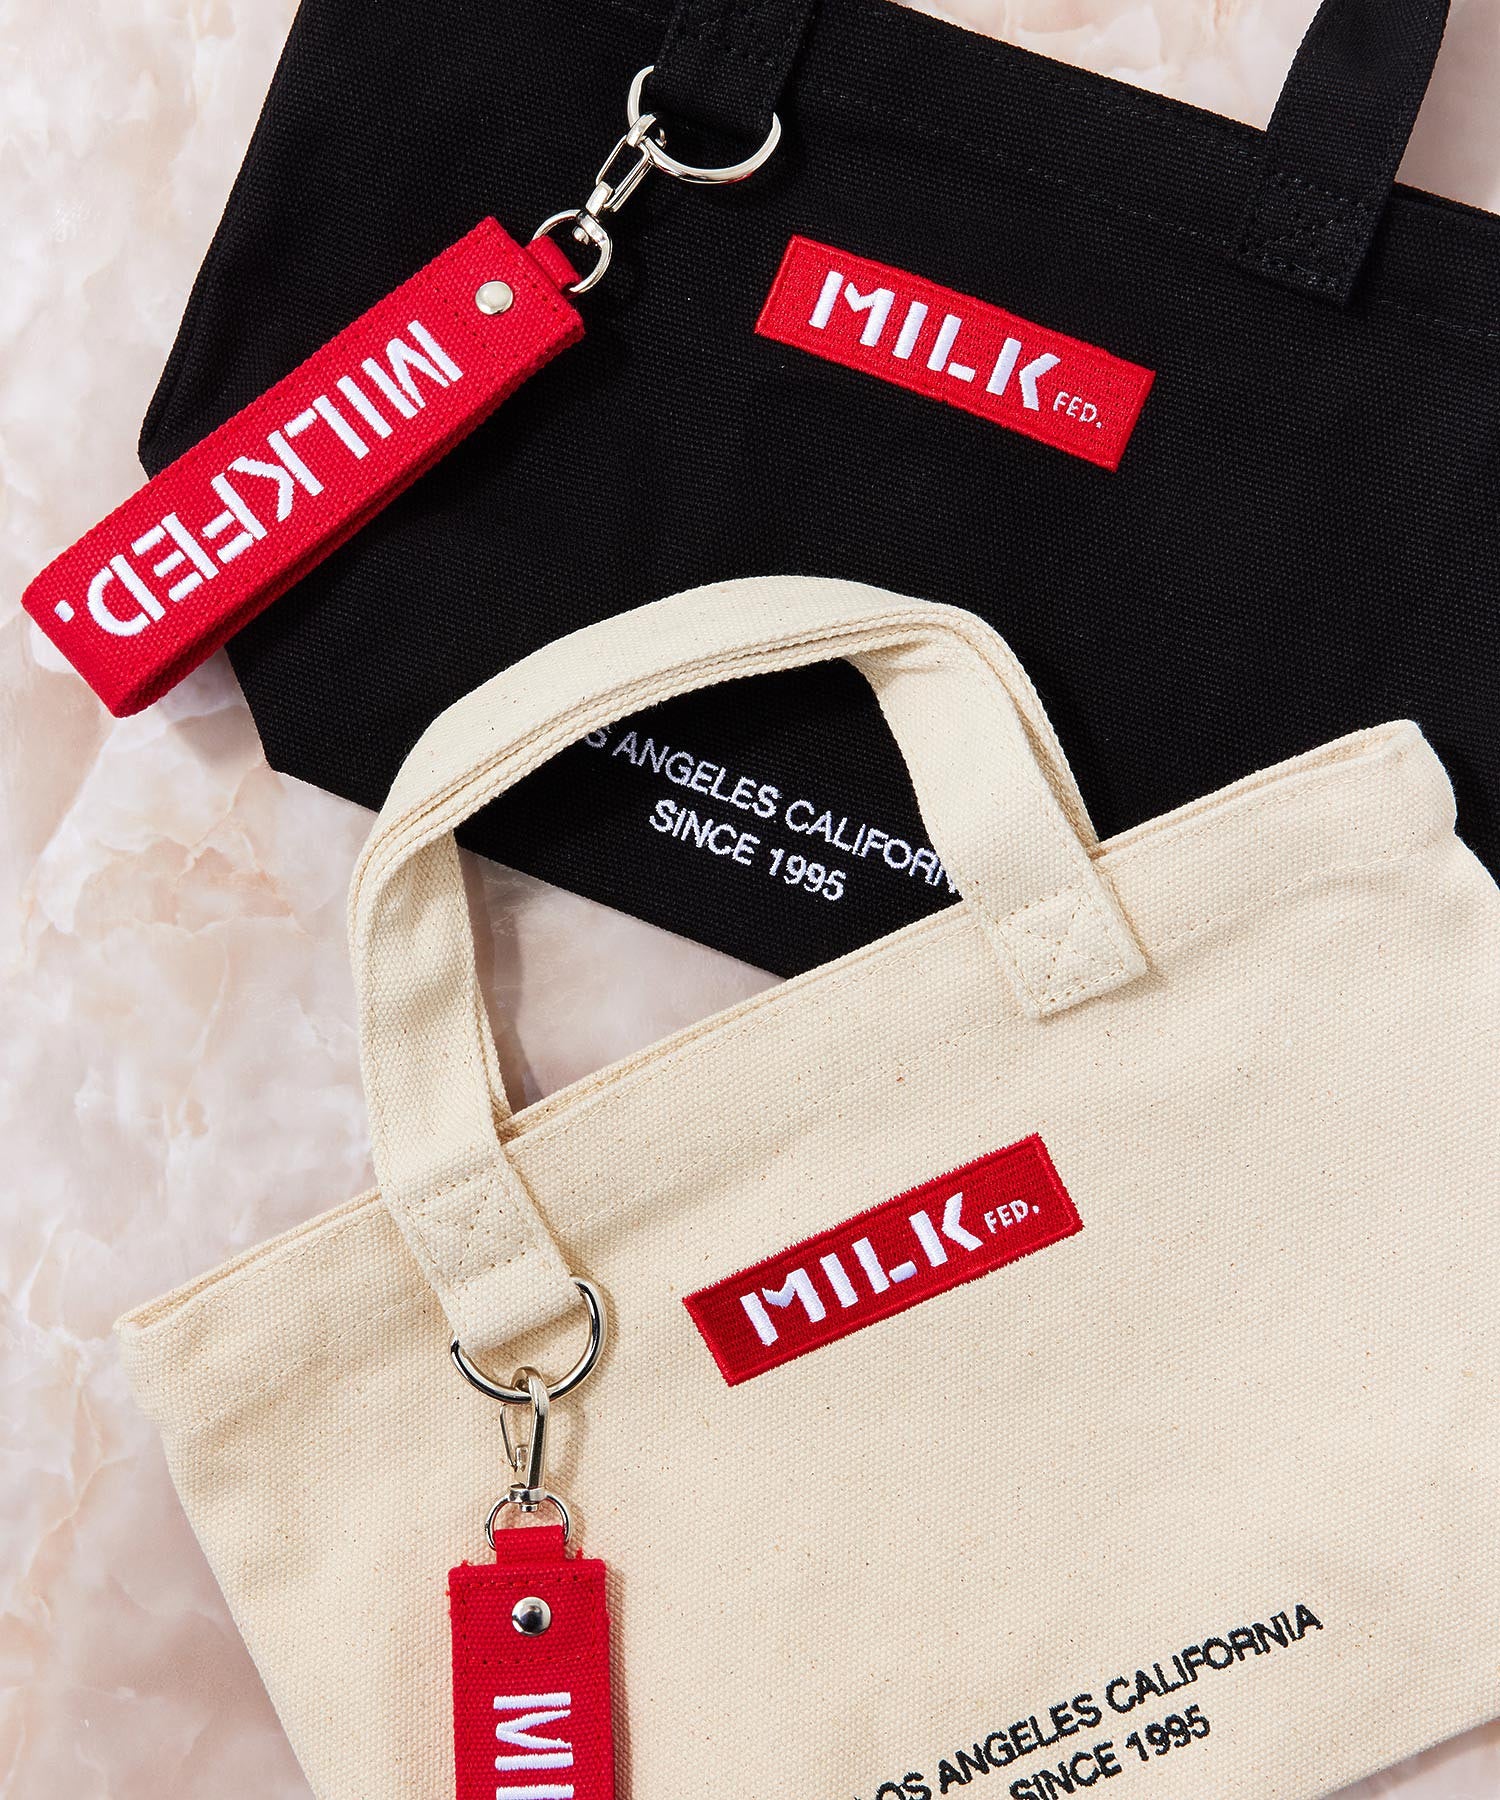 BAR AND UNDER LOGO LUNCH TOTE MILKFED.